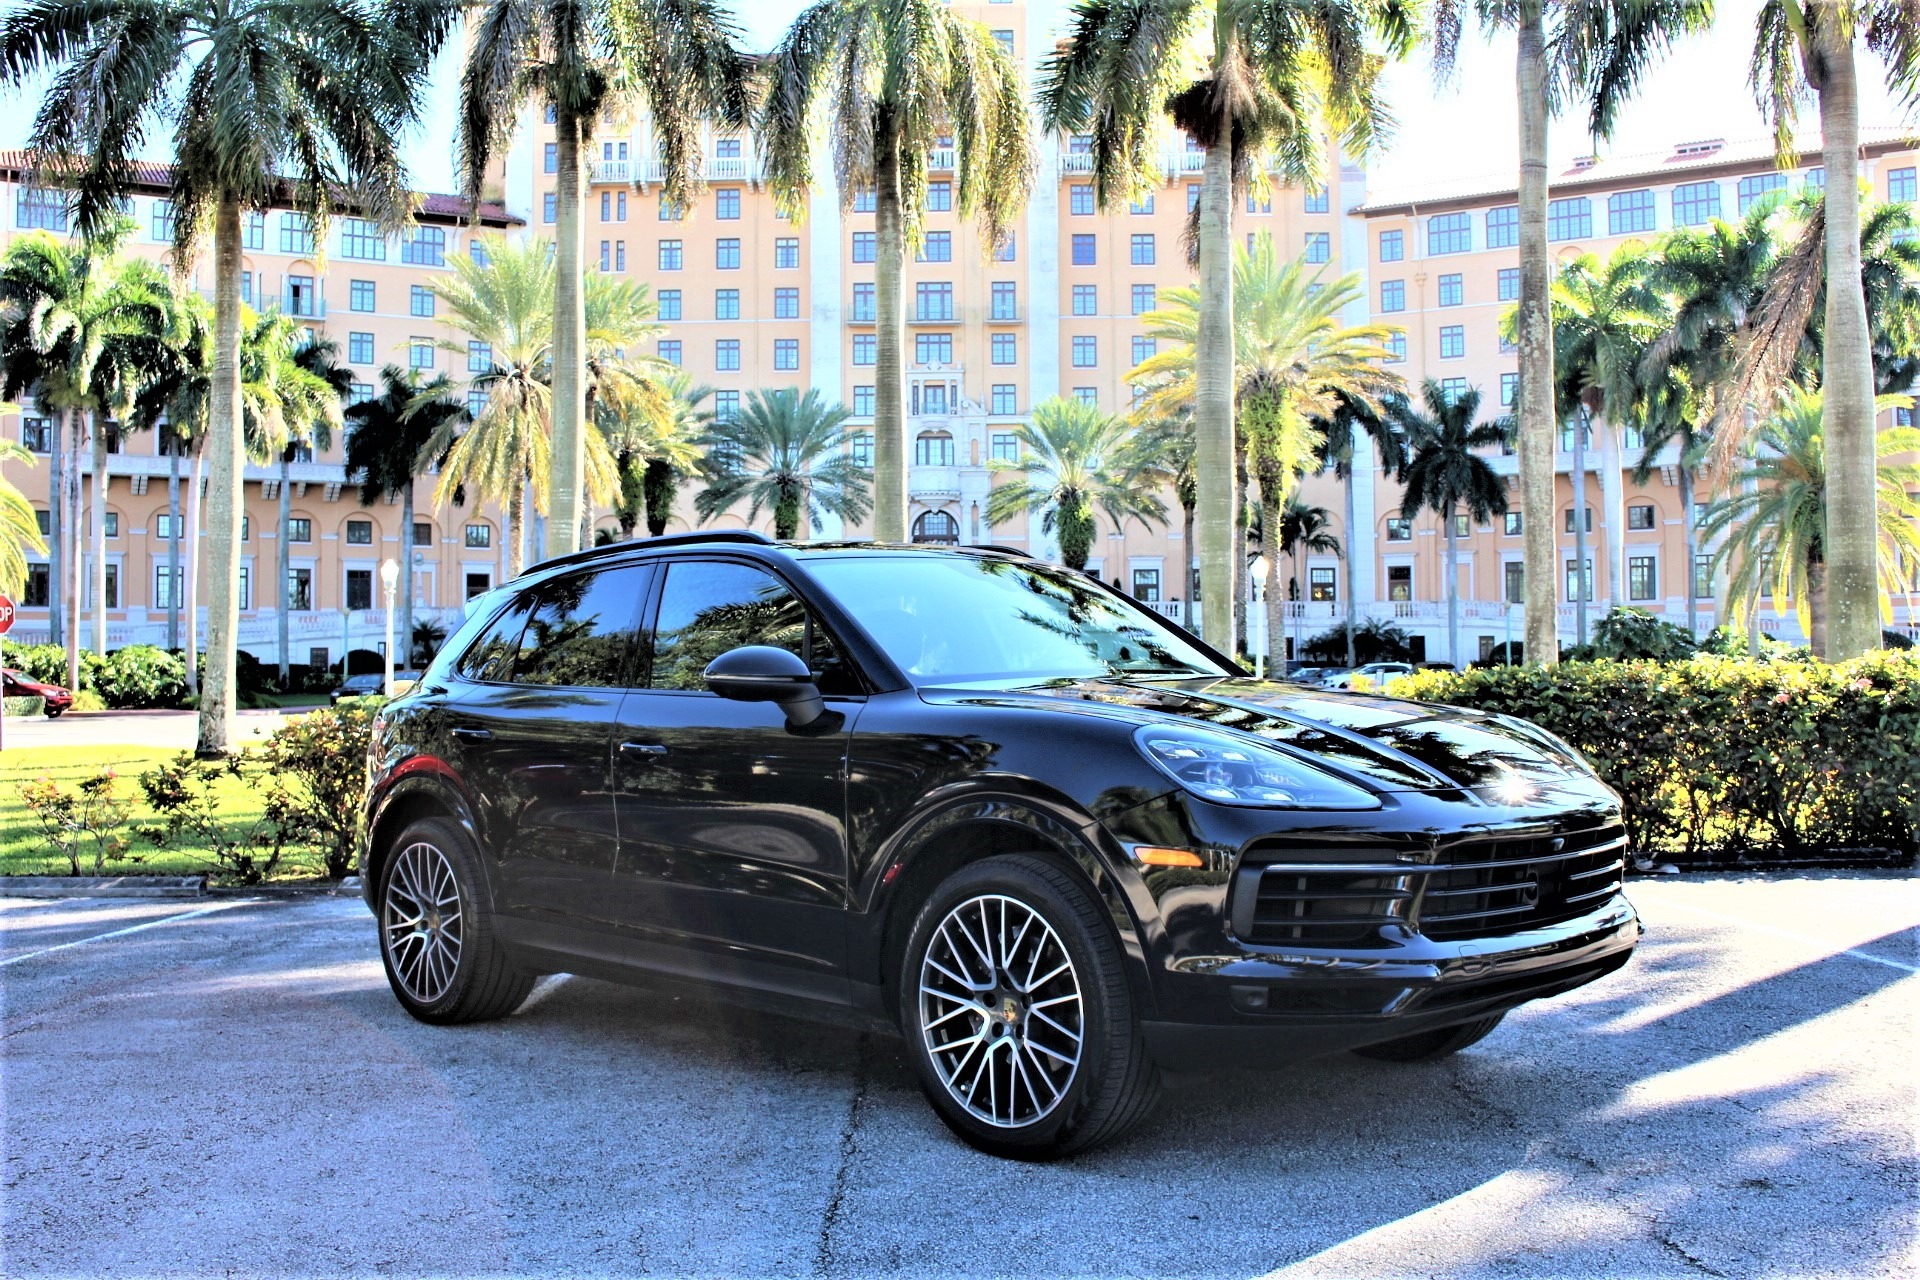 Used 2019 Porsche Cayenne for sale $72,850 at The Gables Sports Cars in Miami FL 33146 4